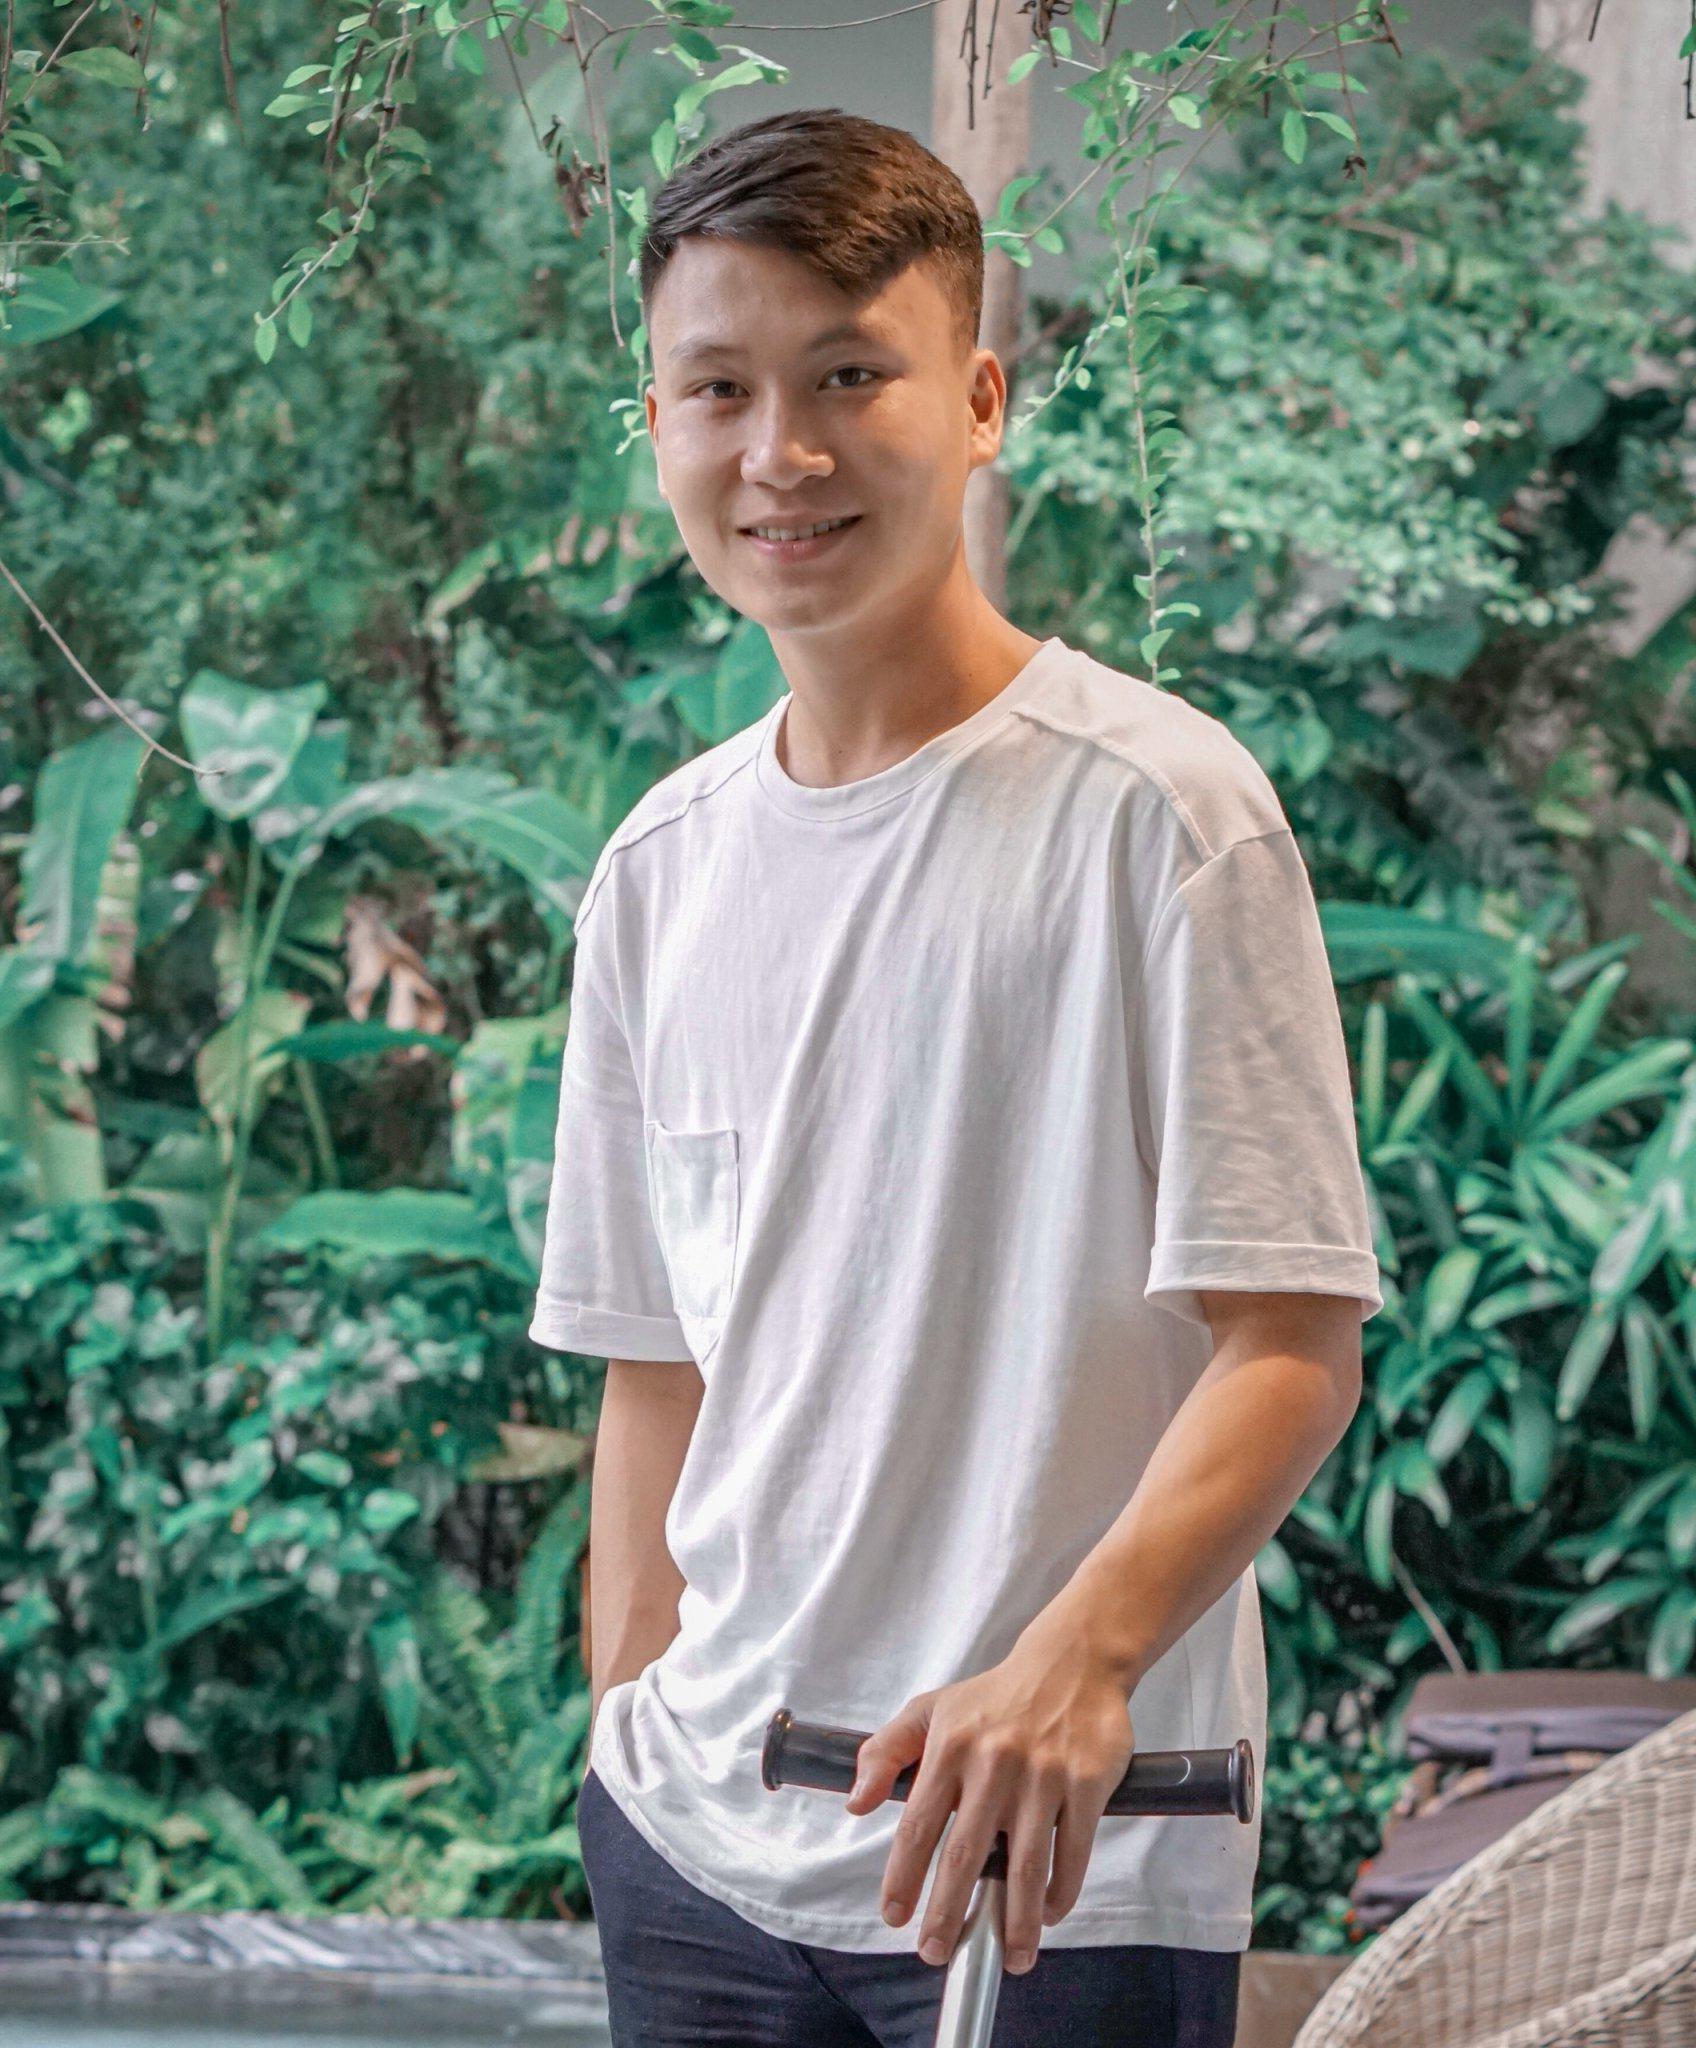  Streamer Minh Hieu handsome with sunny smile